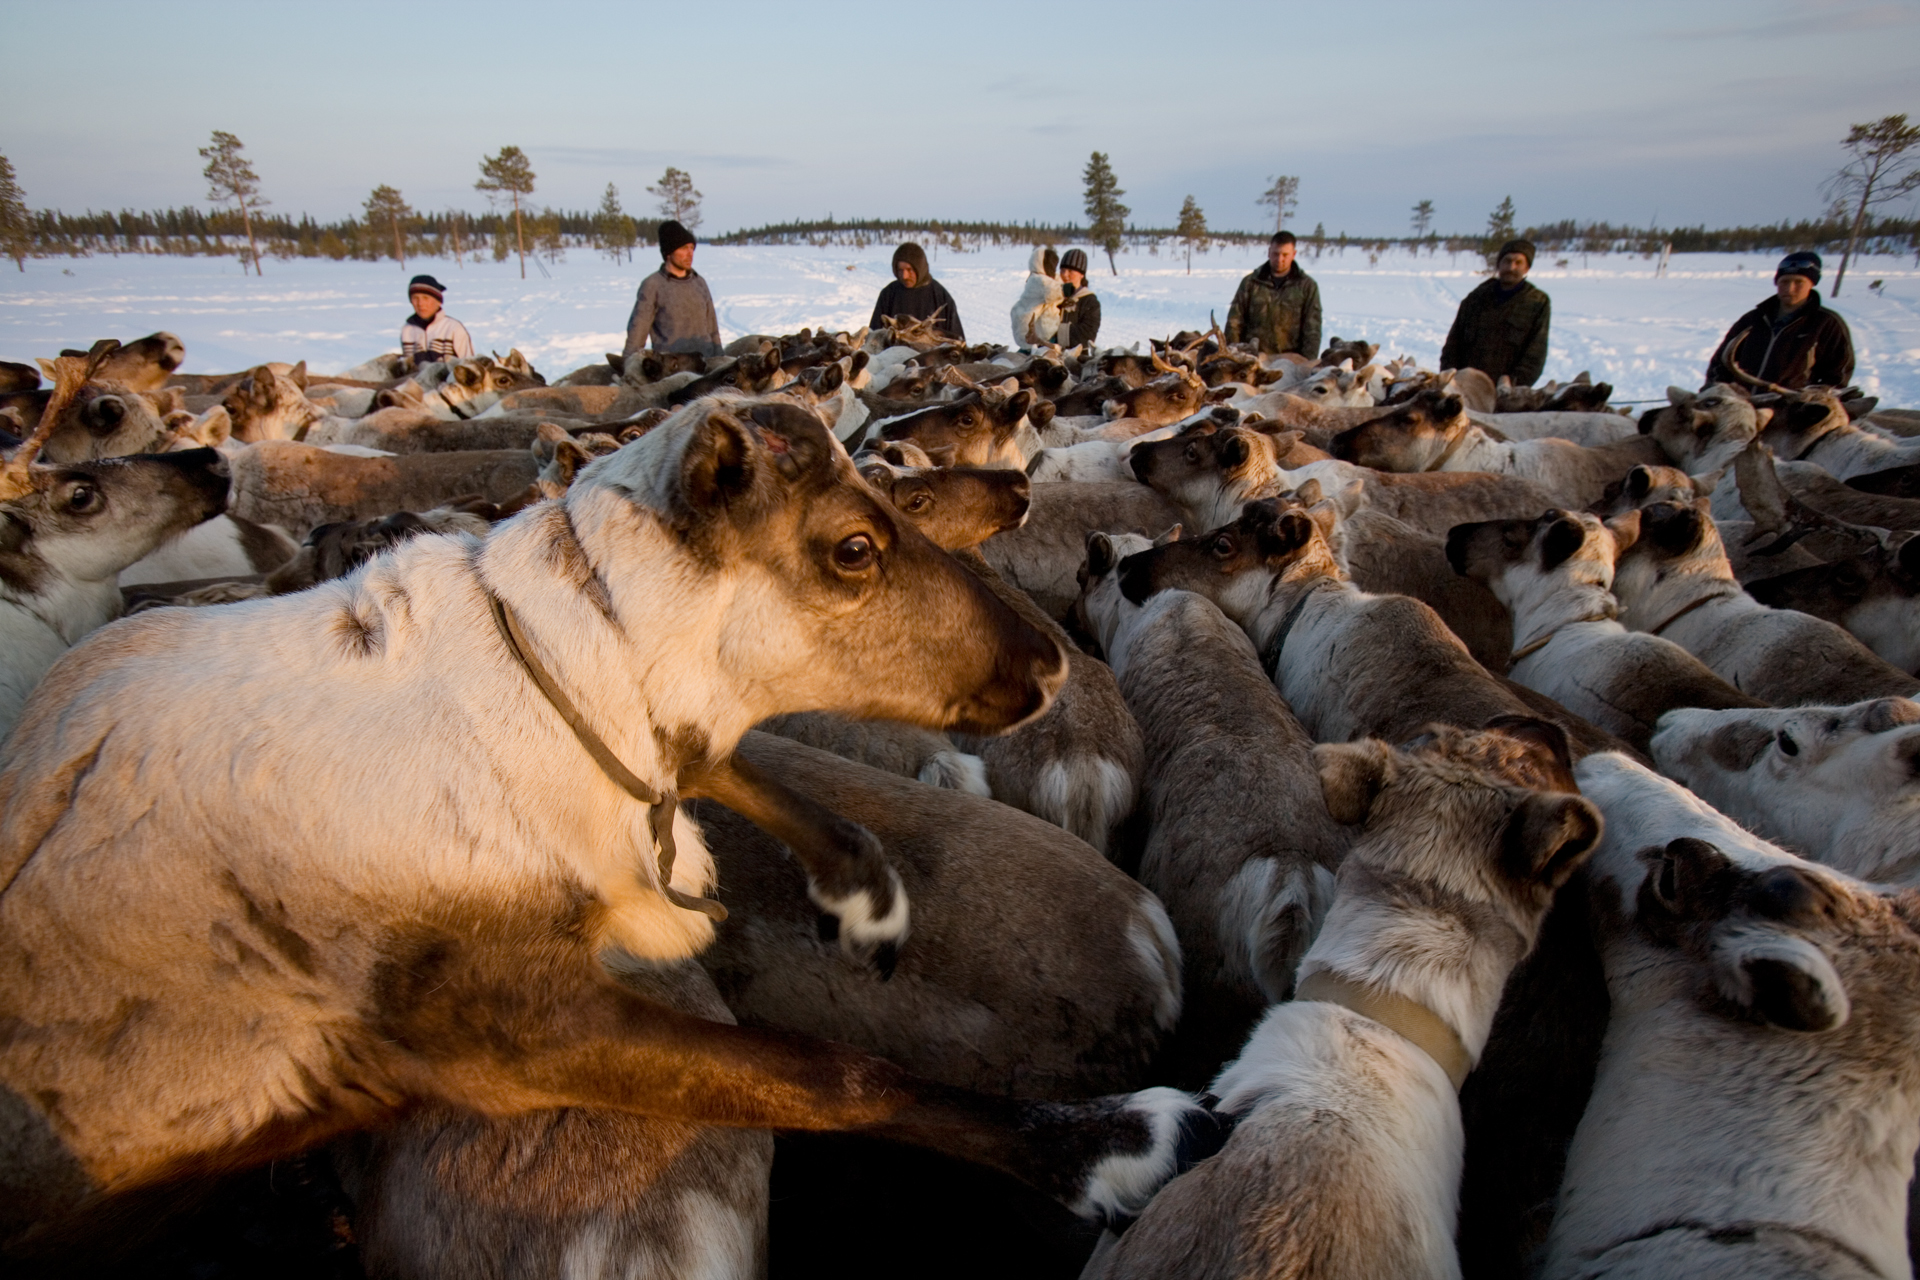  Near Saranpaul, six brigades of reindeer herders with multi-ethnic backgrounds breed and guard up to 3,000 heads.  Khanty-Mansiysk Region, Russia  